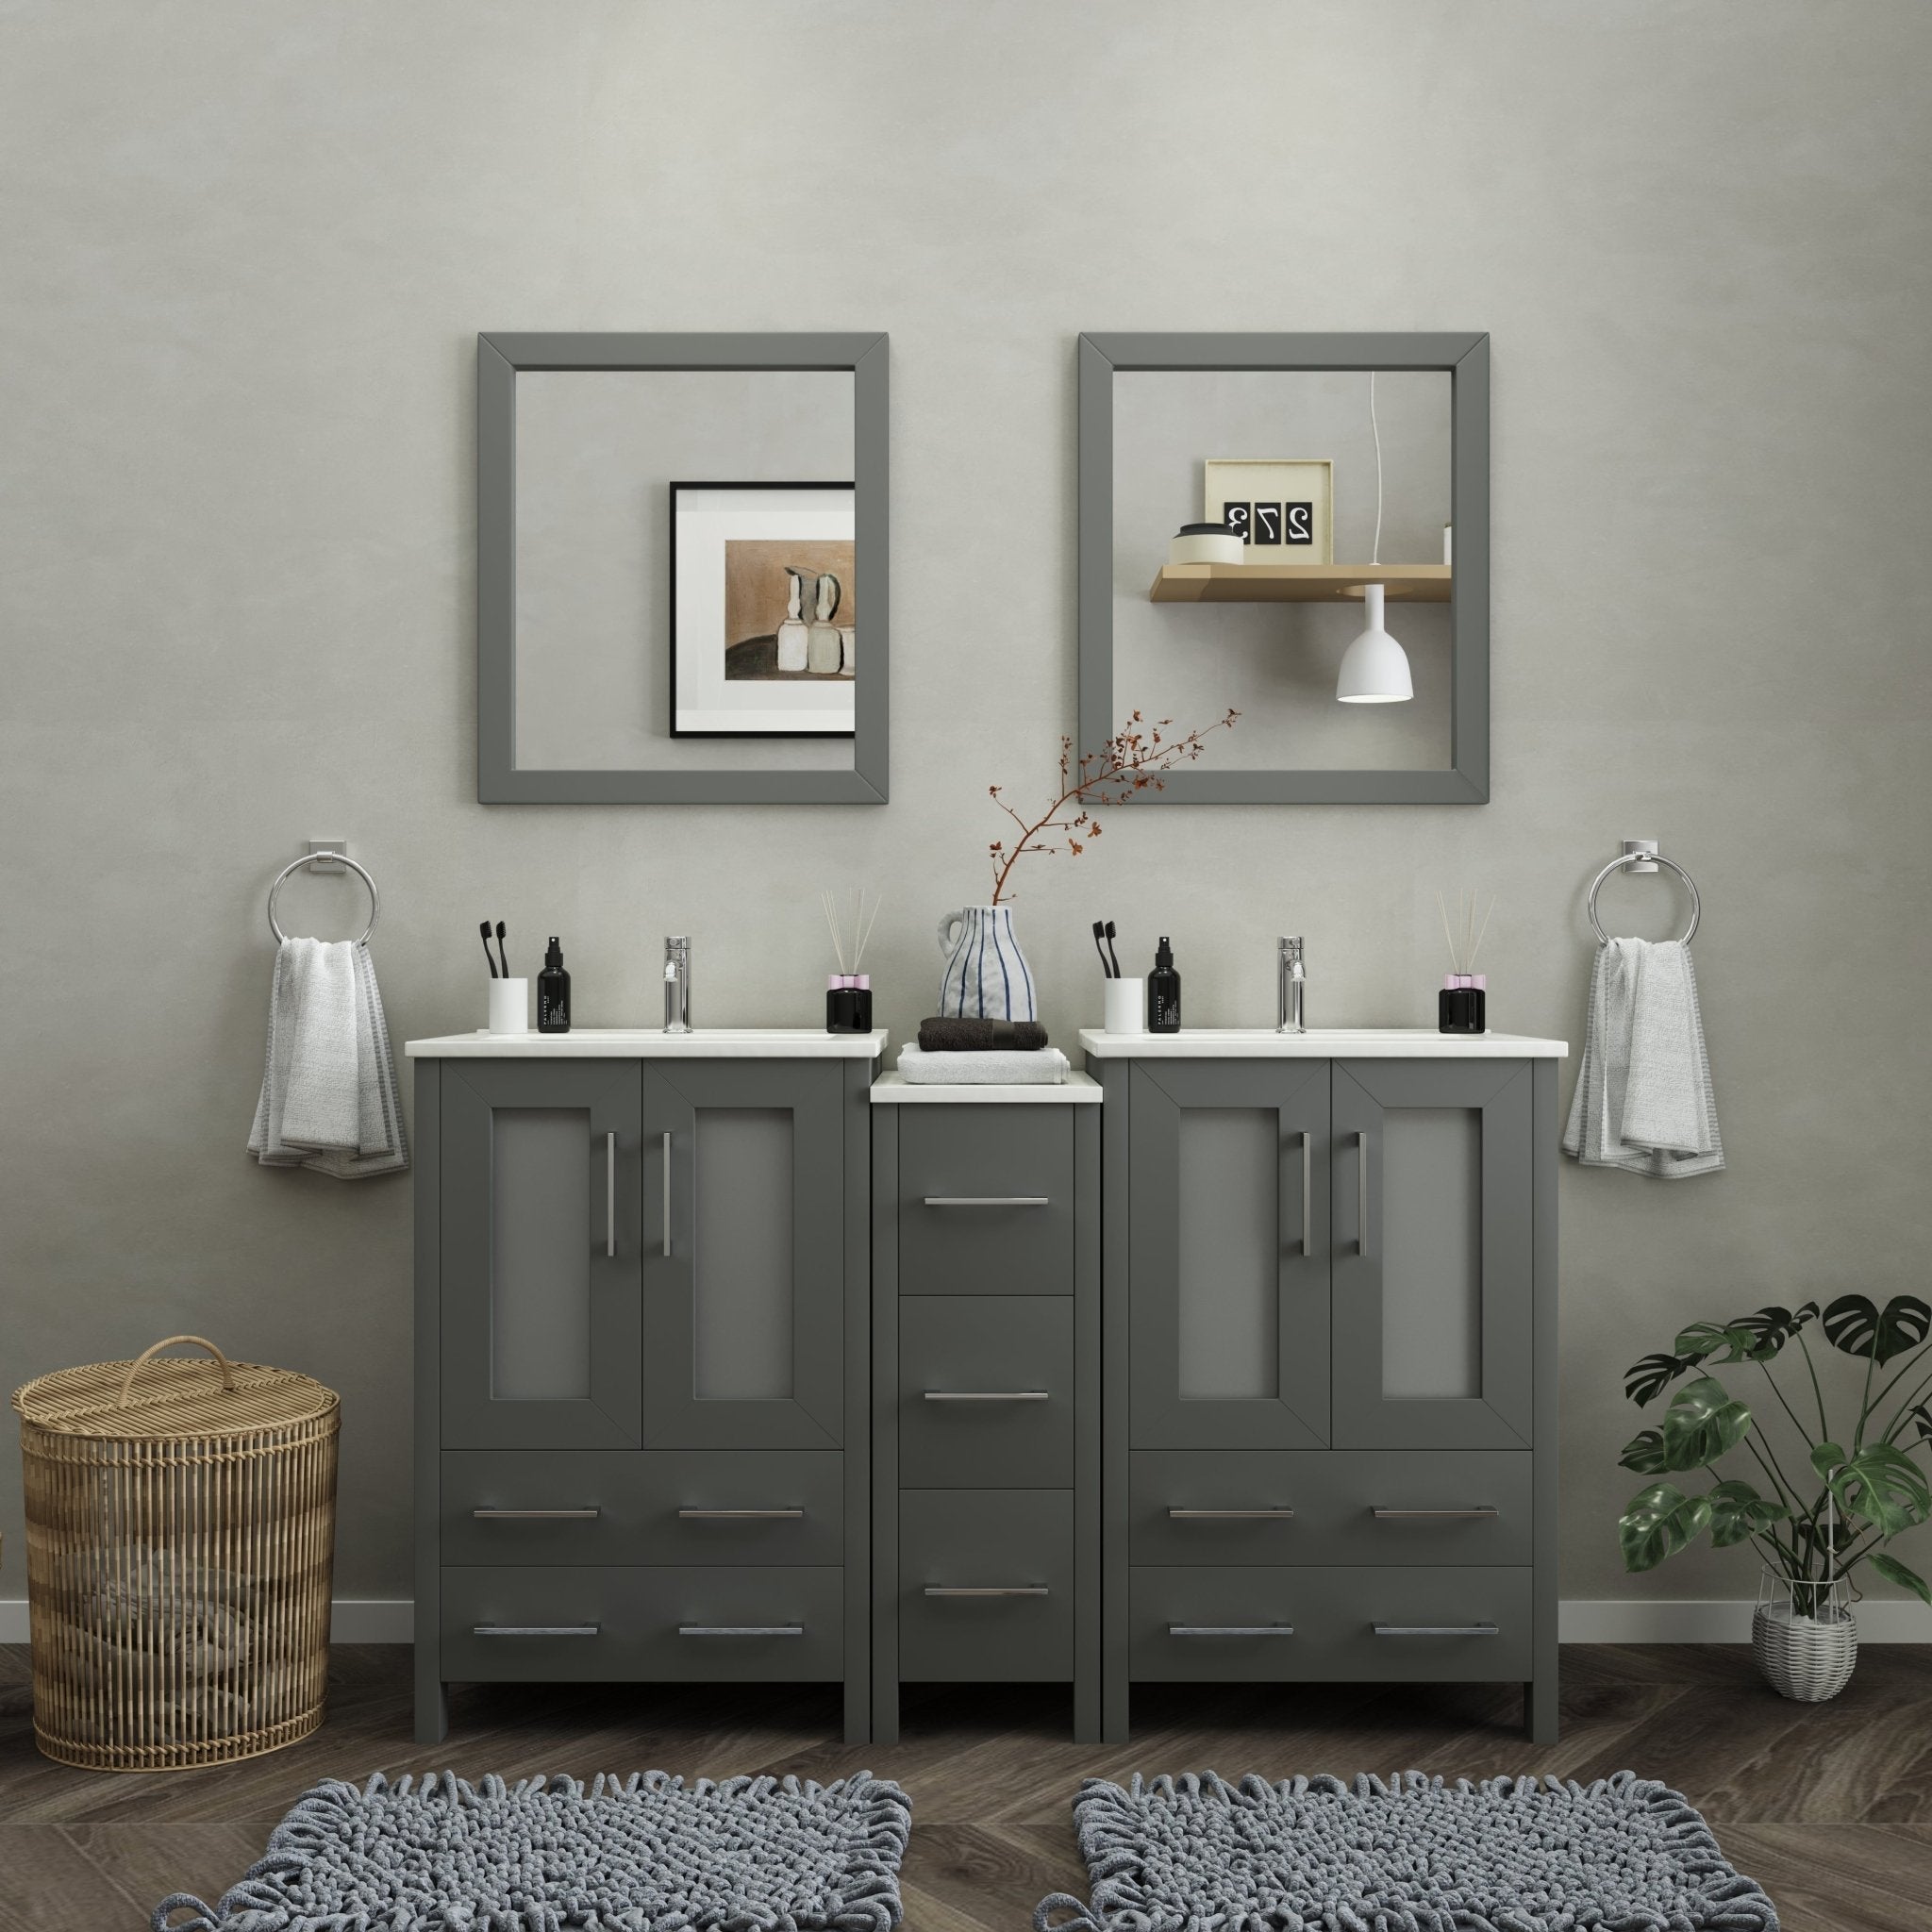 Vanity Art - London 60" Double Sink Bathroom Vanity Set with Sink and Mirrors - 1 Side Cabinet - Bhdepot 